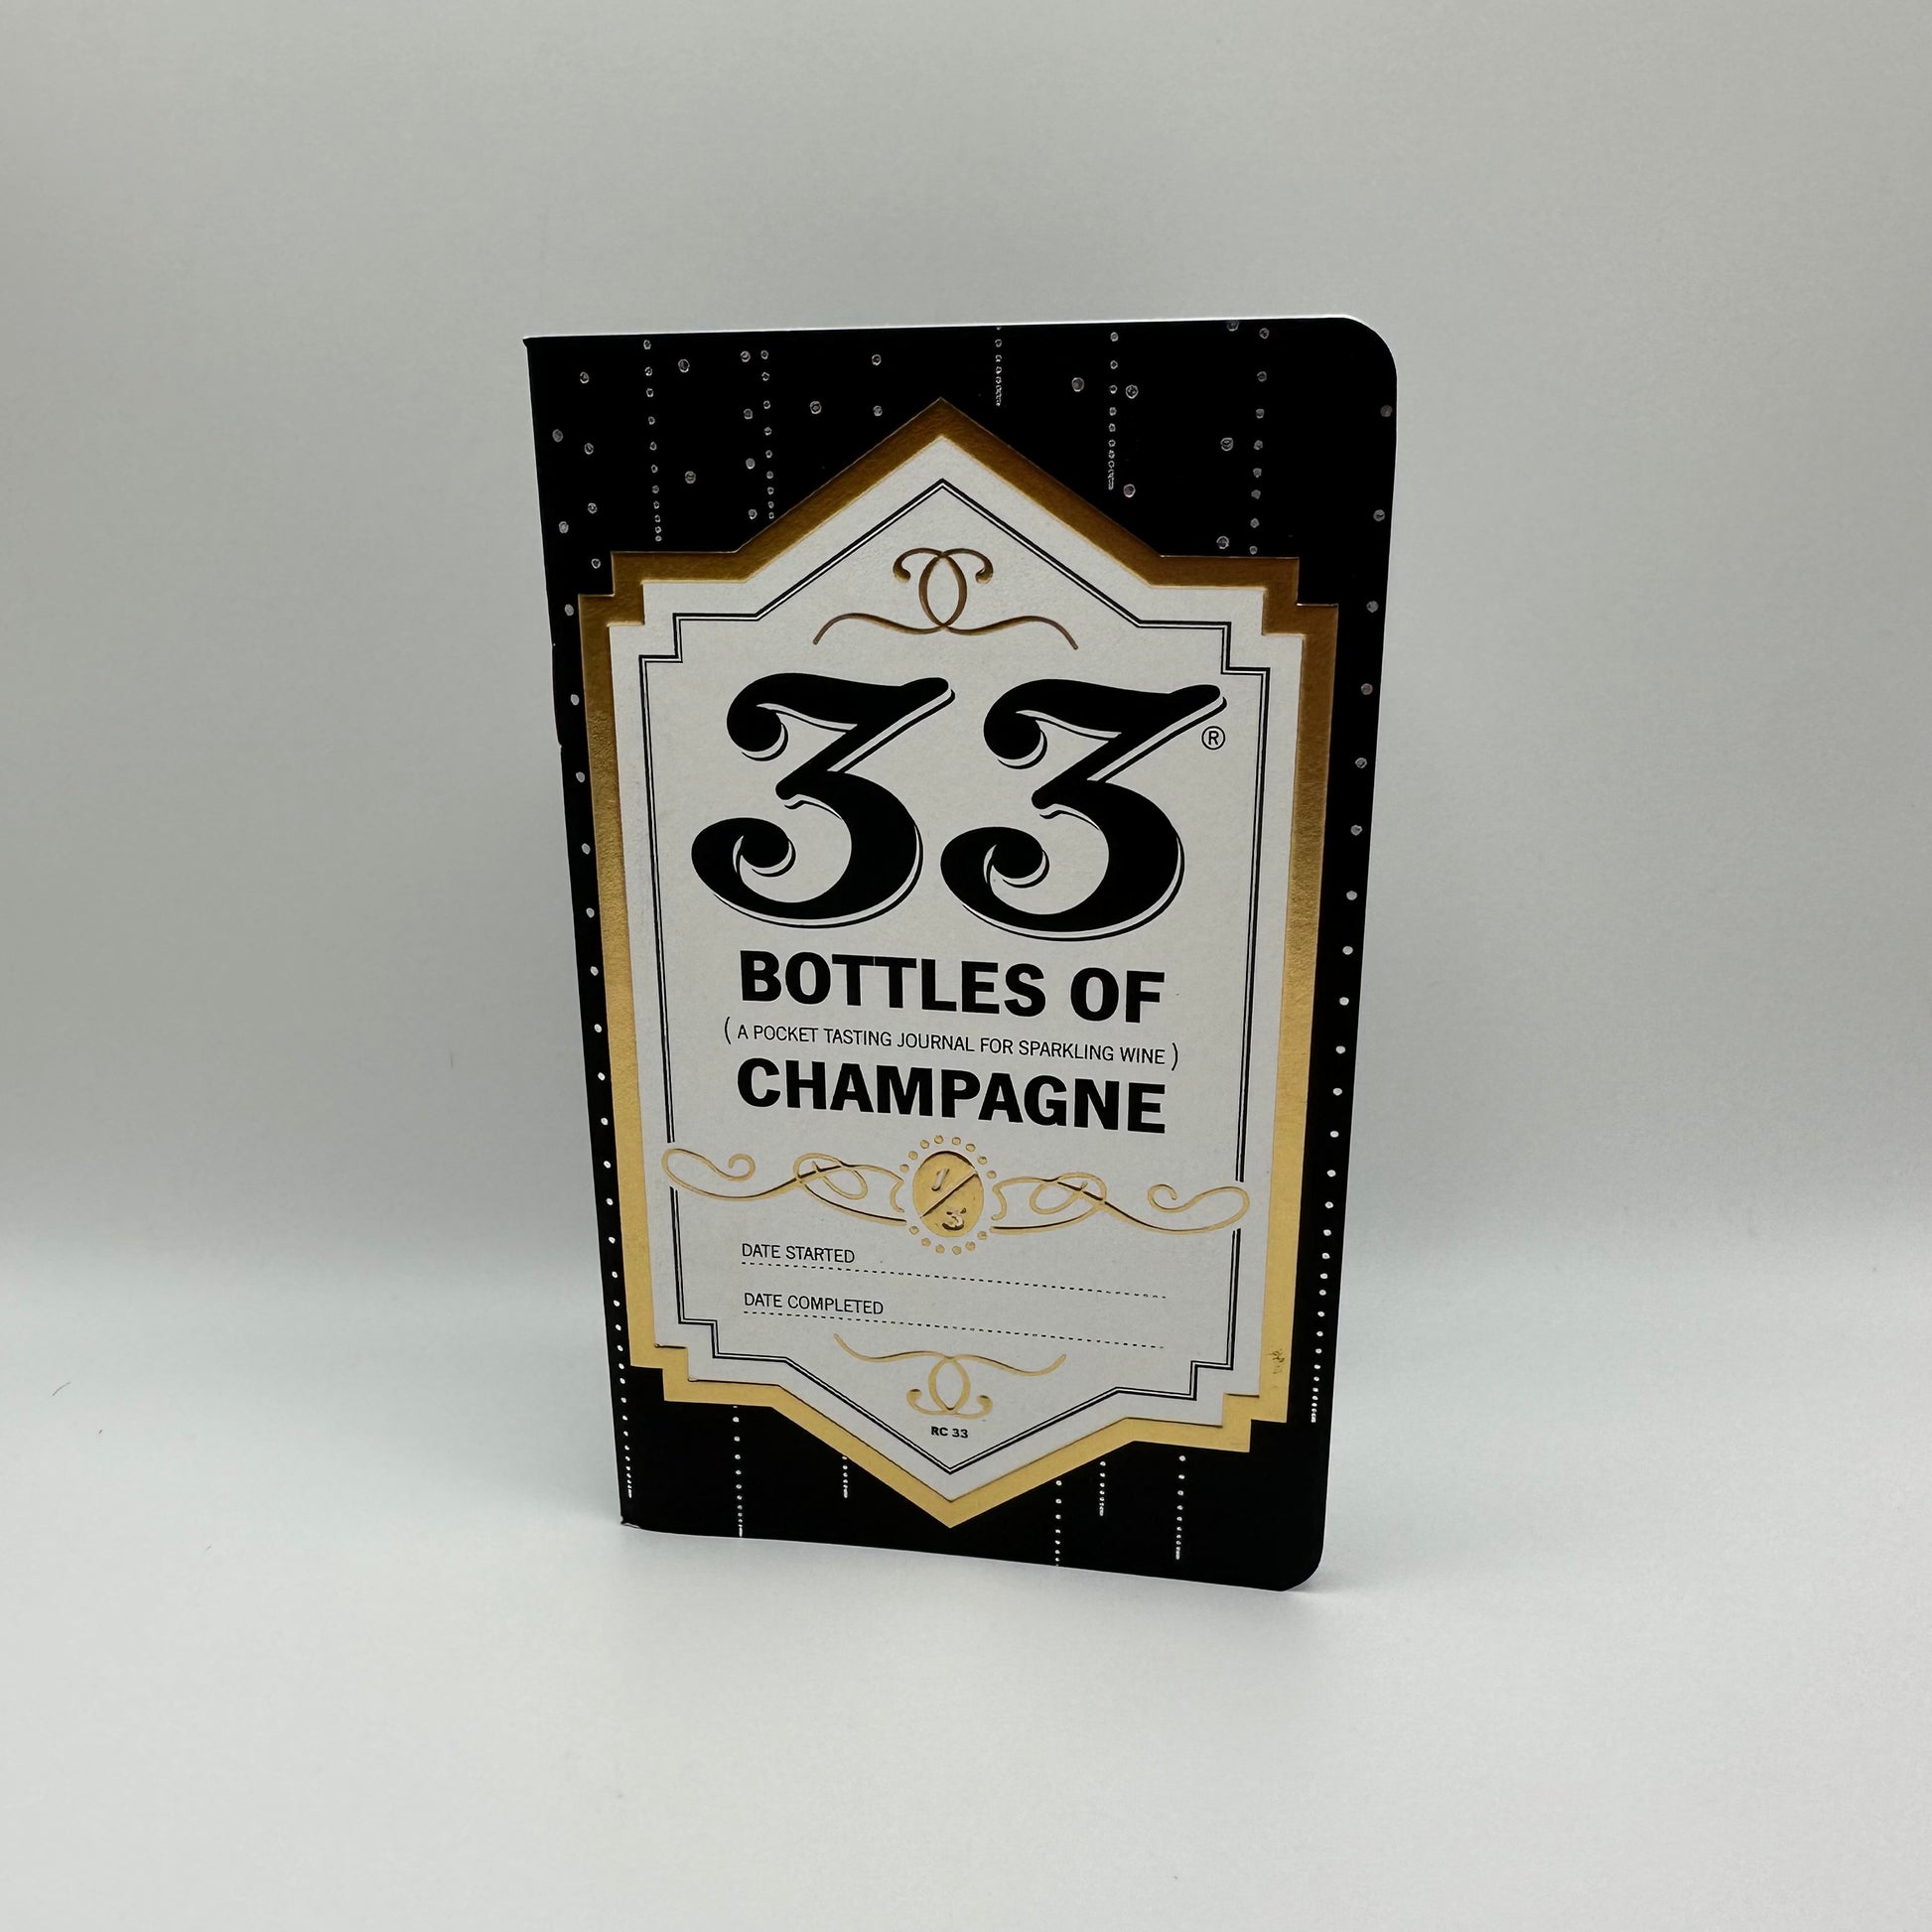 Photo depicting front cover of journal on white background. Journal is recycled paper dyed black with gold trim and black text title "33 Bottles of Champagne - A Pocket Tasting Journal for sparkling wine." Also small text on the bottom for user to notate "Date Started" and "Date Completed.".